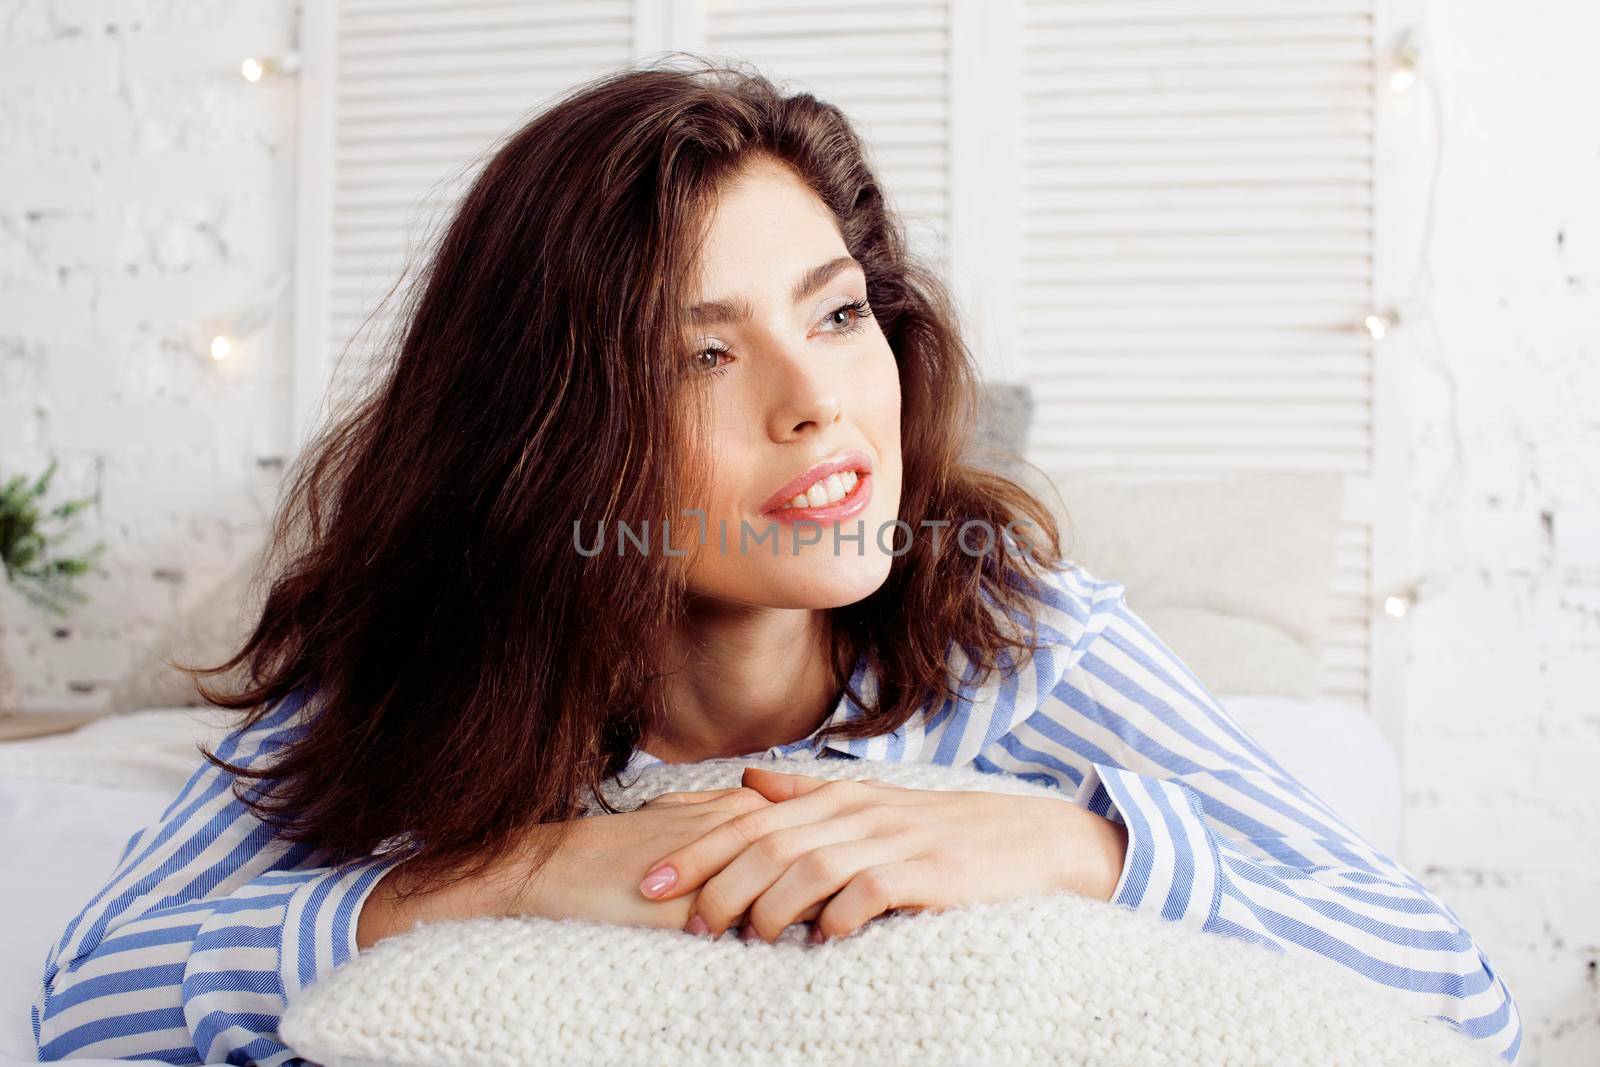 young pretty brunette woman in her bedroom sitting at window, happy smiling lifestyle people concept close up